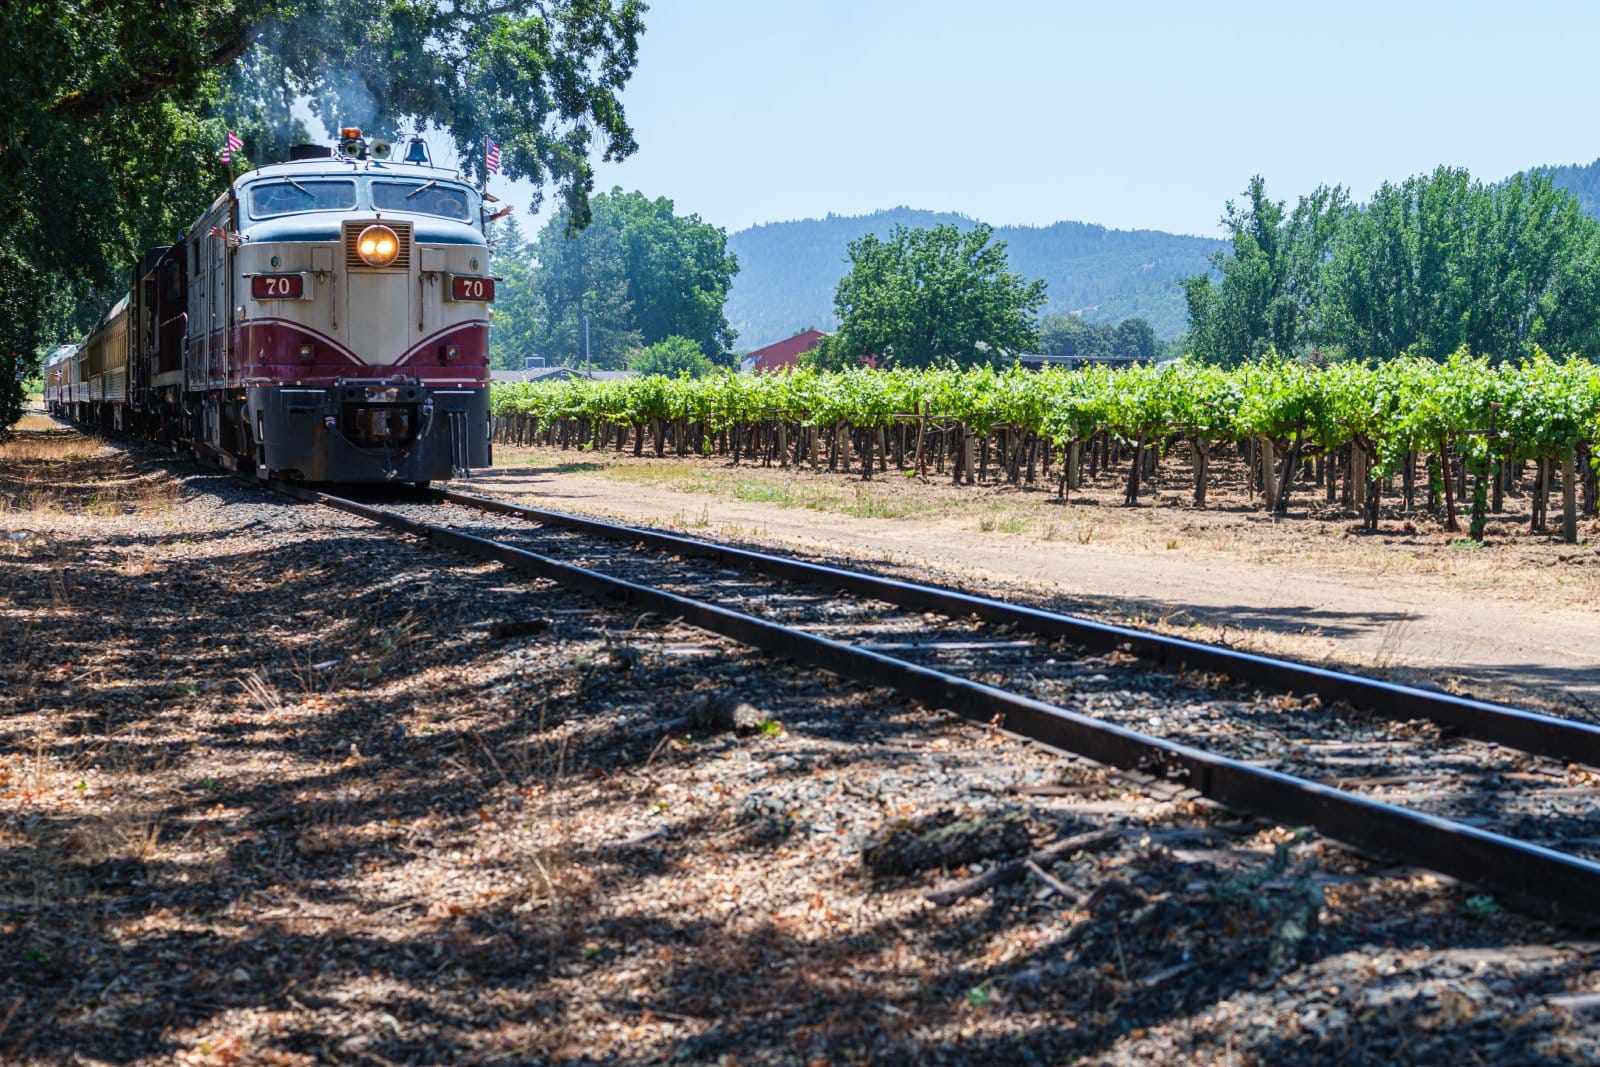 <p class="wp-caption-text">Image Credit: Shutterstock / Paul Thomas Curry</p>  <p><span>The Napa Valley Wine Train is an iconic journey that captures the essence of Napa Valley’s winemaking tradition. Travelers are invited aboard vintage railcars, where they are treated to a fusion of scenic beauty, gourmet cuisine, and the finest local wines. As the train weaves through the heart of Napa Valley, passengers witness the changing landscapes of vineyards and mountains, making it a unique way to experience the region’s viticultural heritage.</span></p>